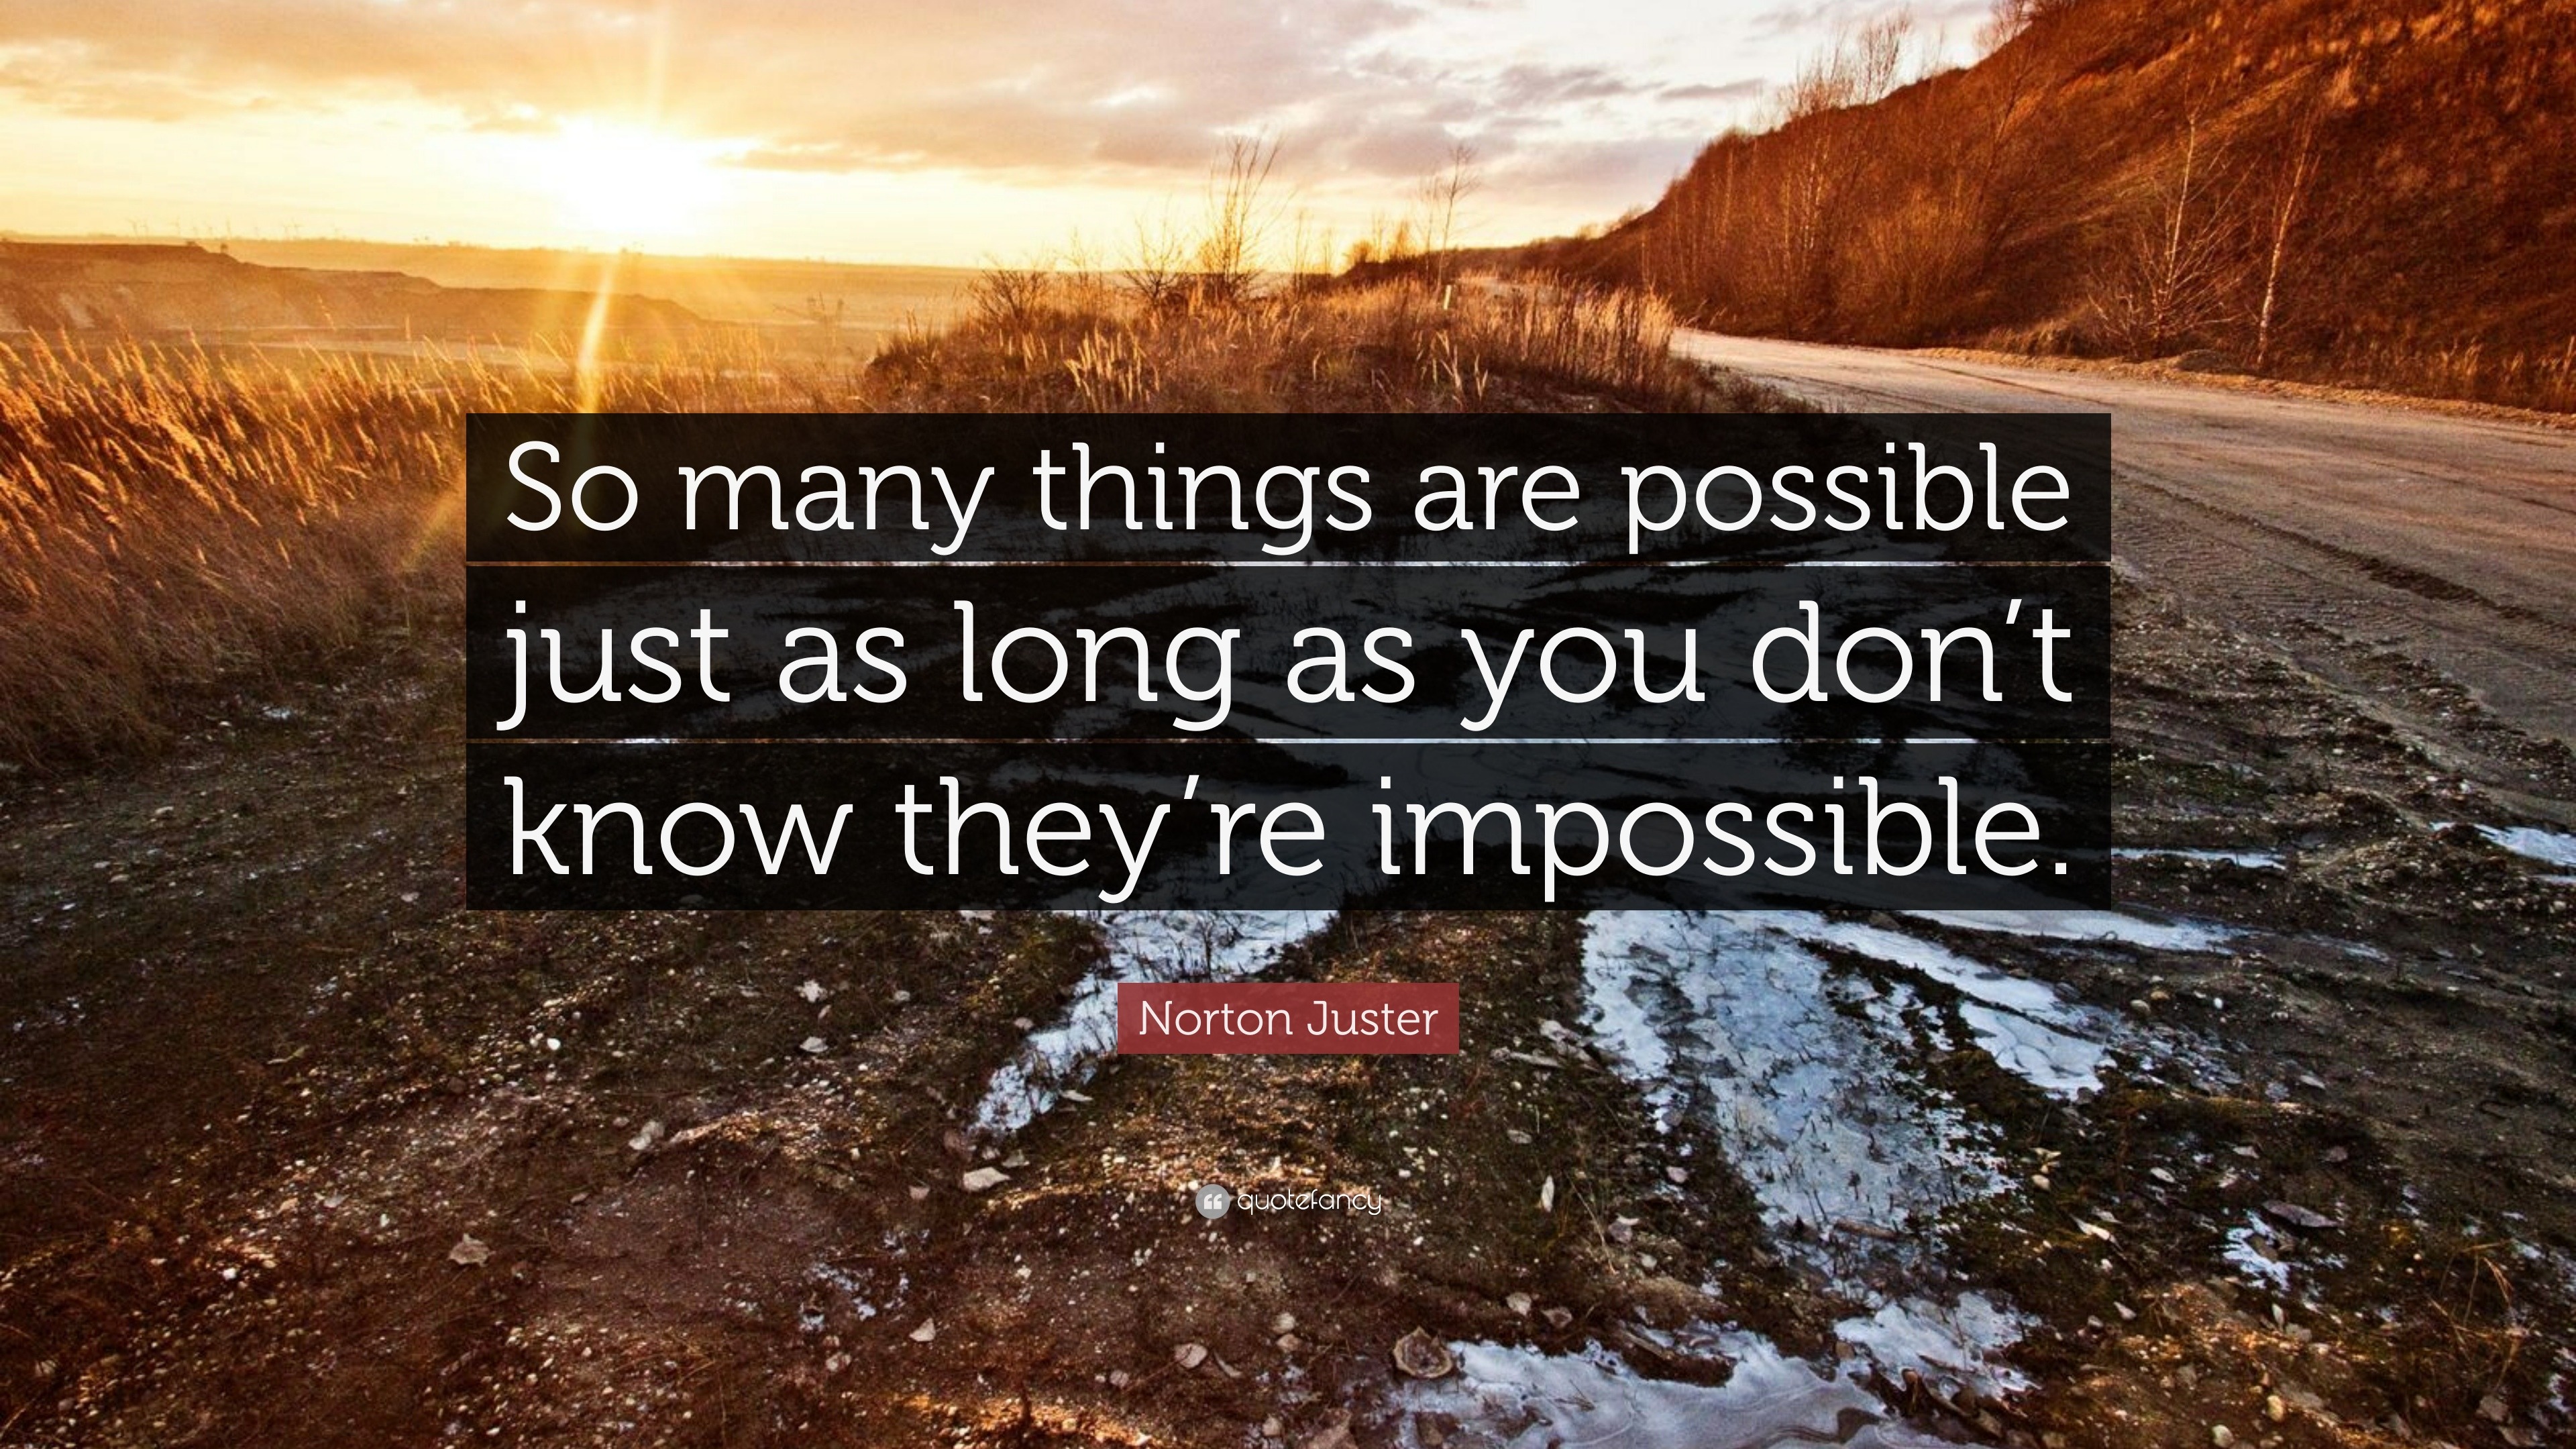 Norton Juster Quote: “So many things are possible just as long as you ...